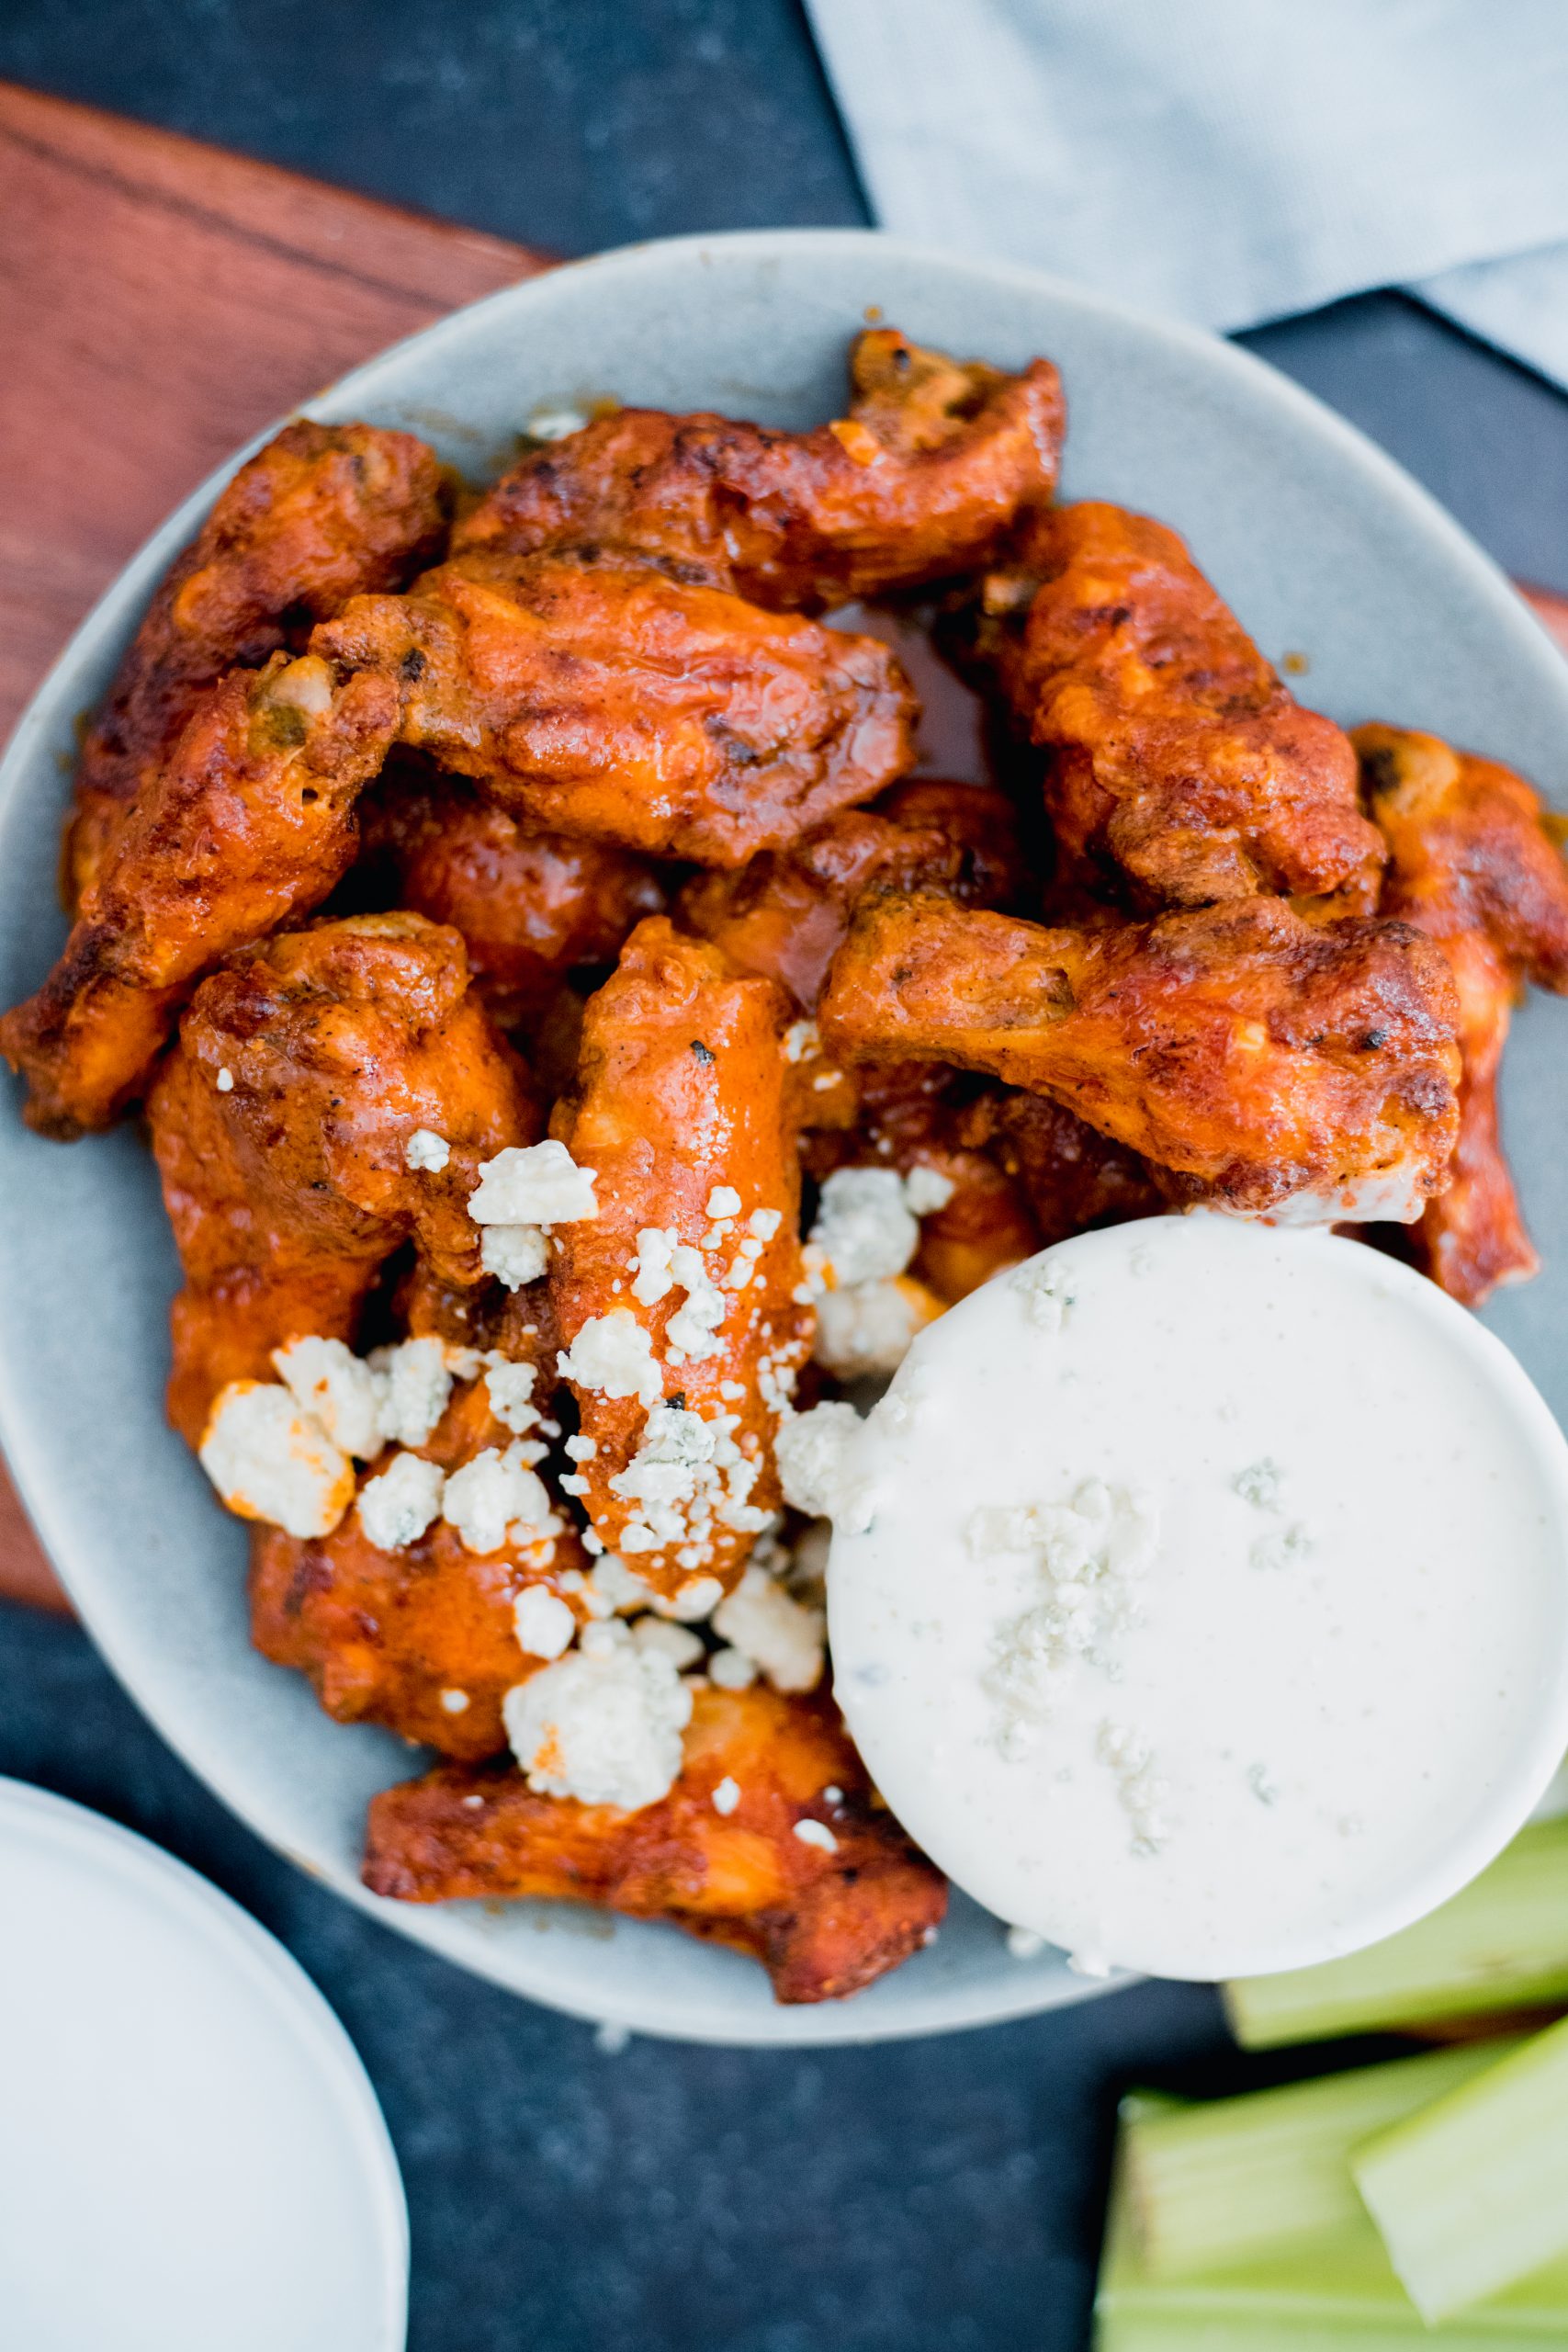 Bowl with buffalo wings and a small container of white dressing.